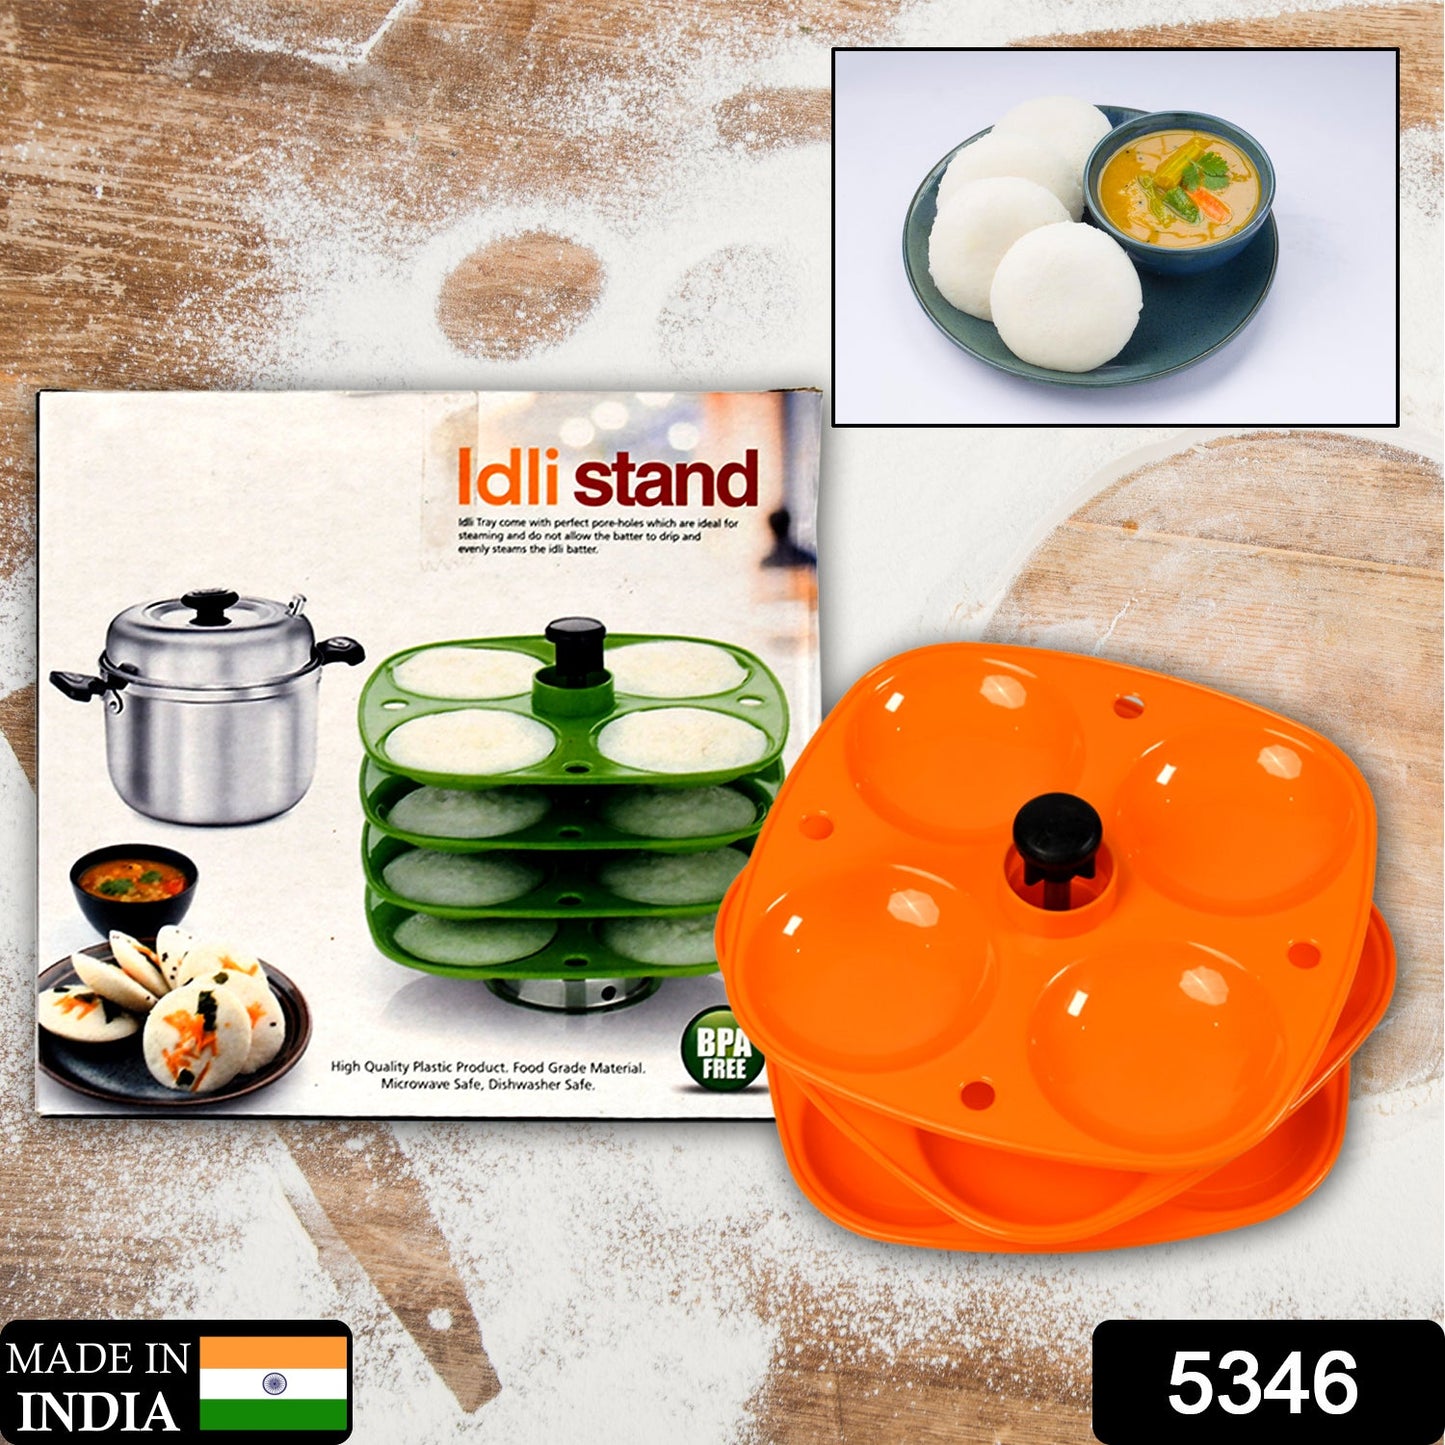 5346 3 Layer Idli Stand used in all kinds of household kitchen purposes for holding and serving idlis. - SWASTIK CREATIONS The Trend Point SWASTIK CREATIONS The Trend Point